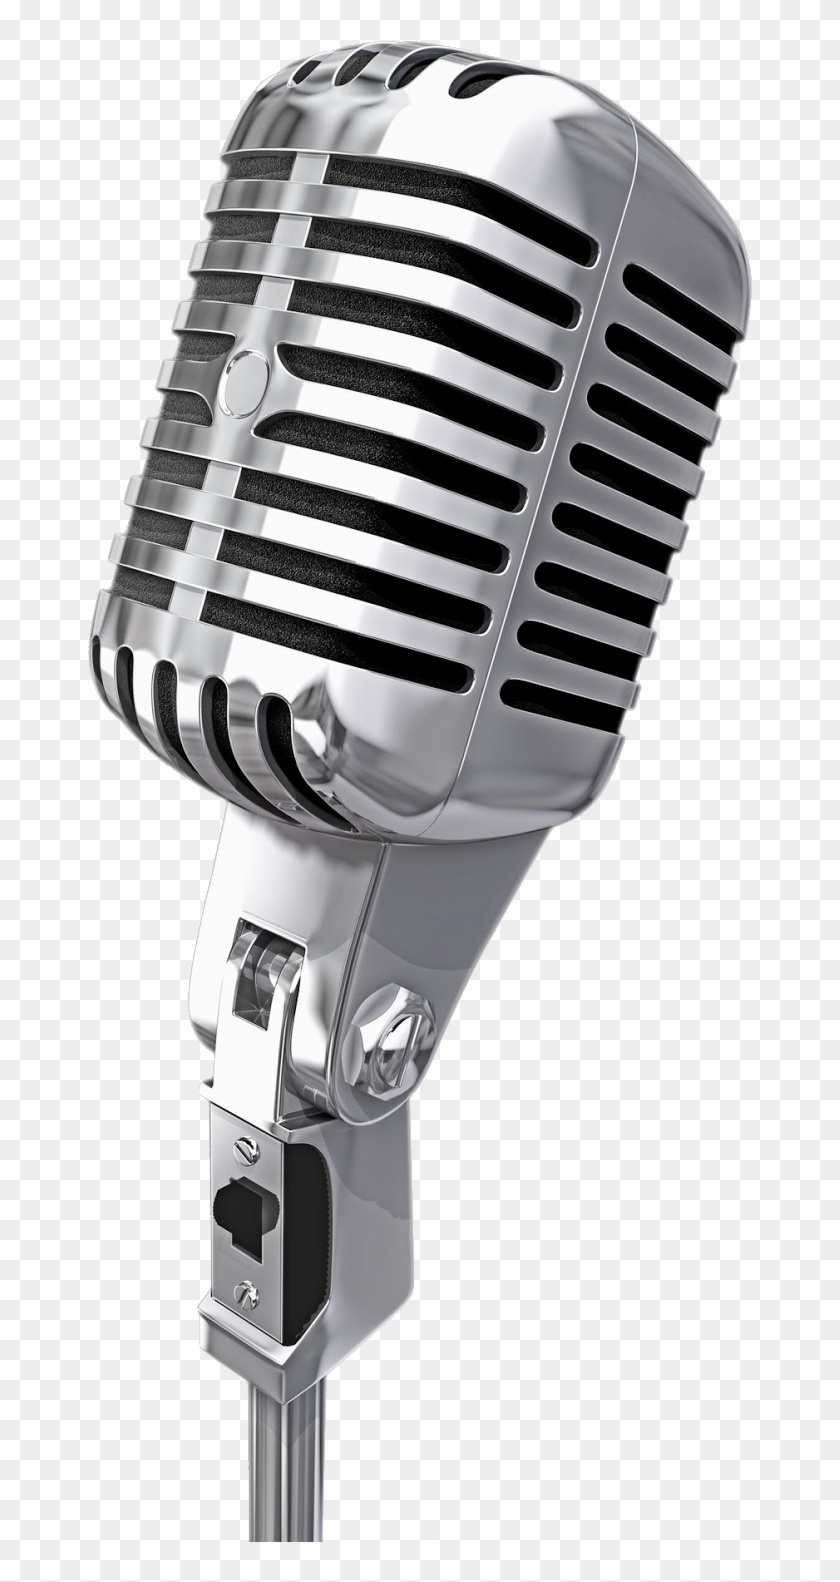 Microphone Png Image - Microphone Png #477152